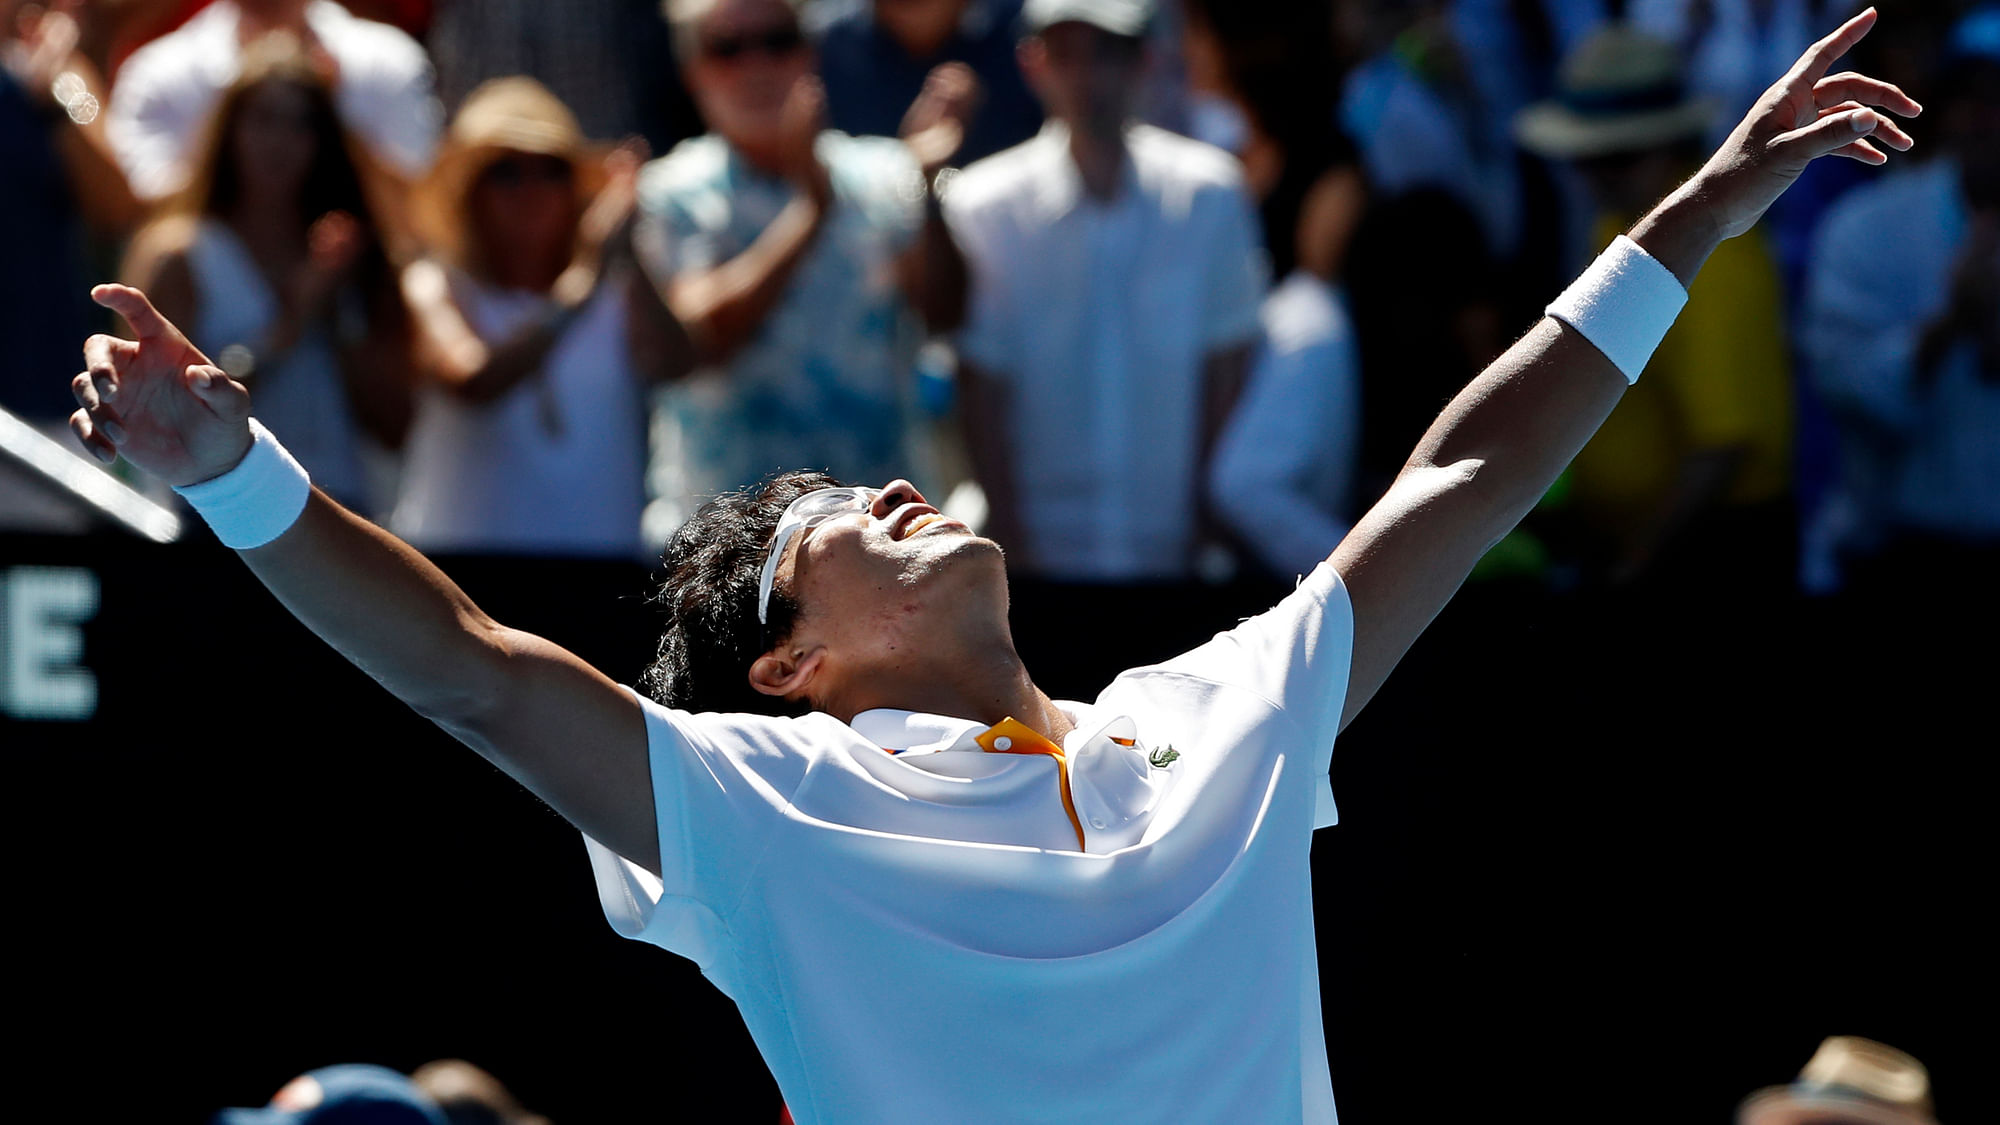 South Korea’s Chung Hyeon celebrates after defeating United States’ Tennys Sandgren in their quarterfinal at the Australian Open on Wednesday.